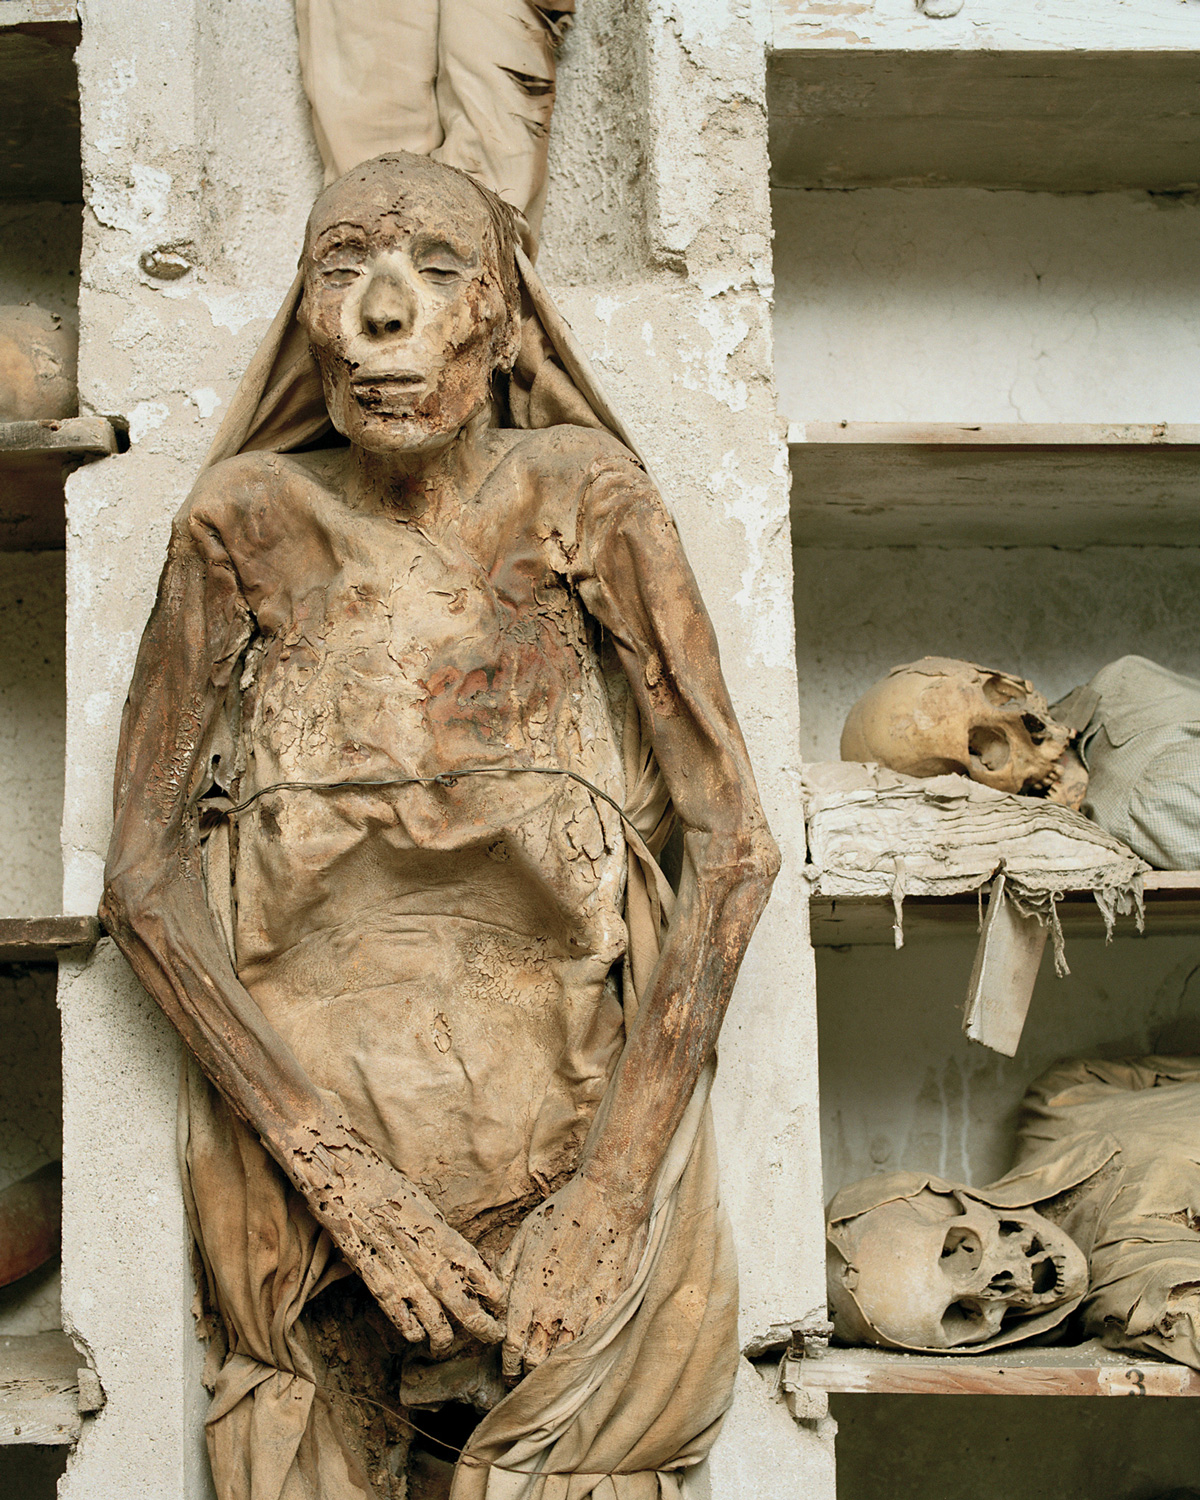 A photograph of corpses in the catacombs of Palermo.